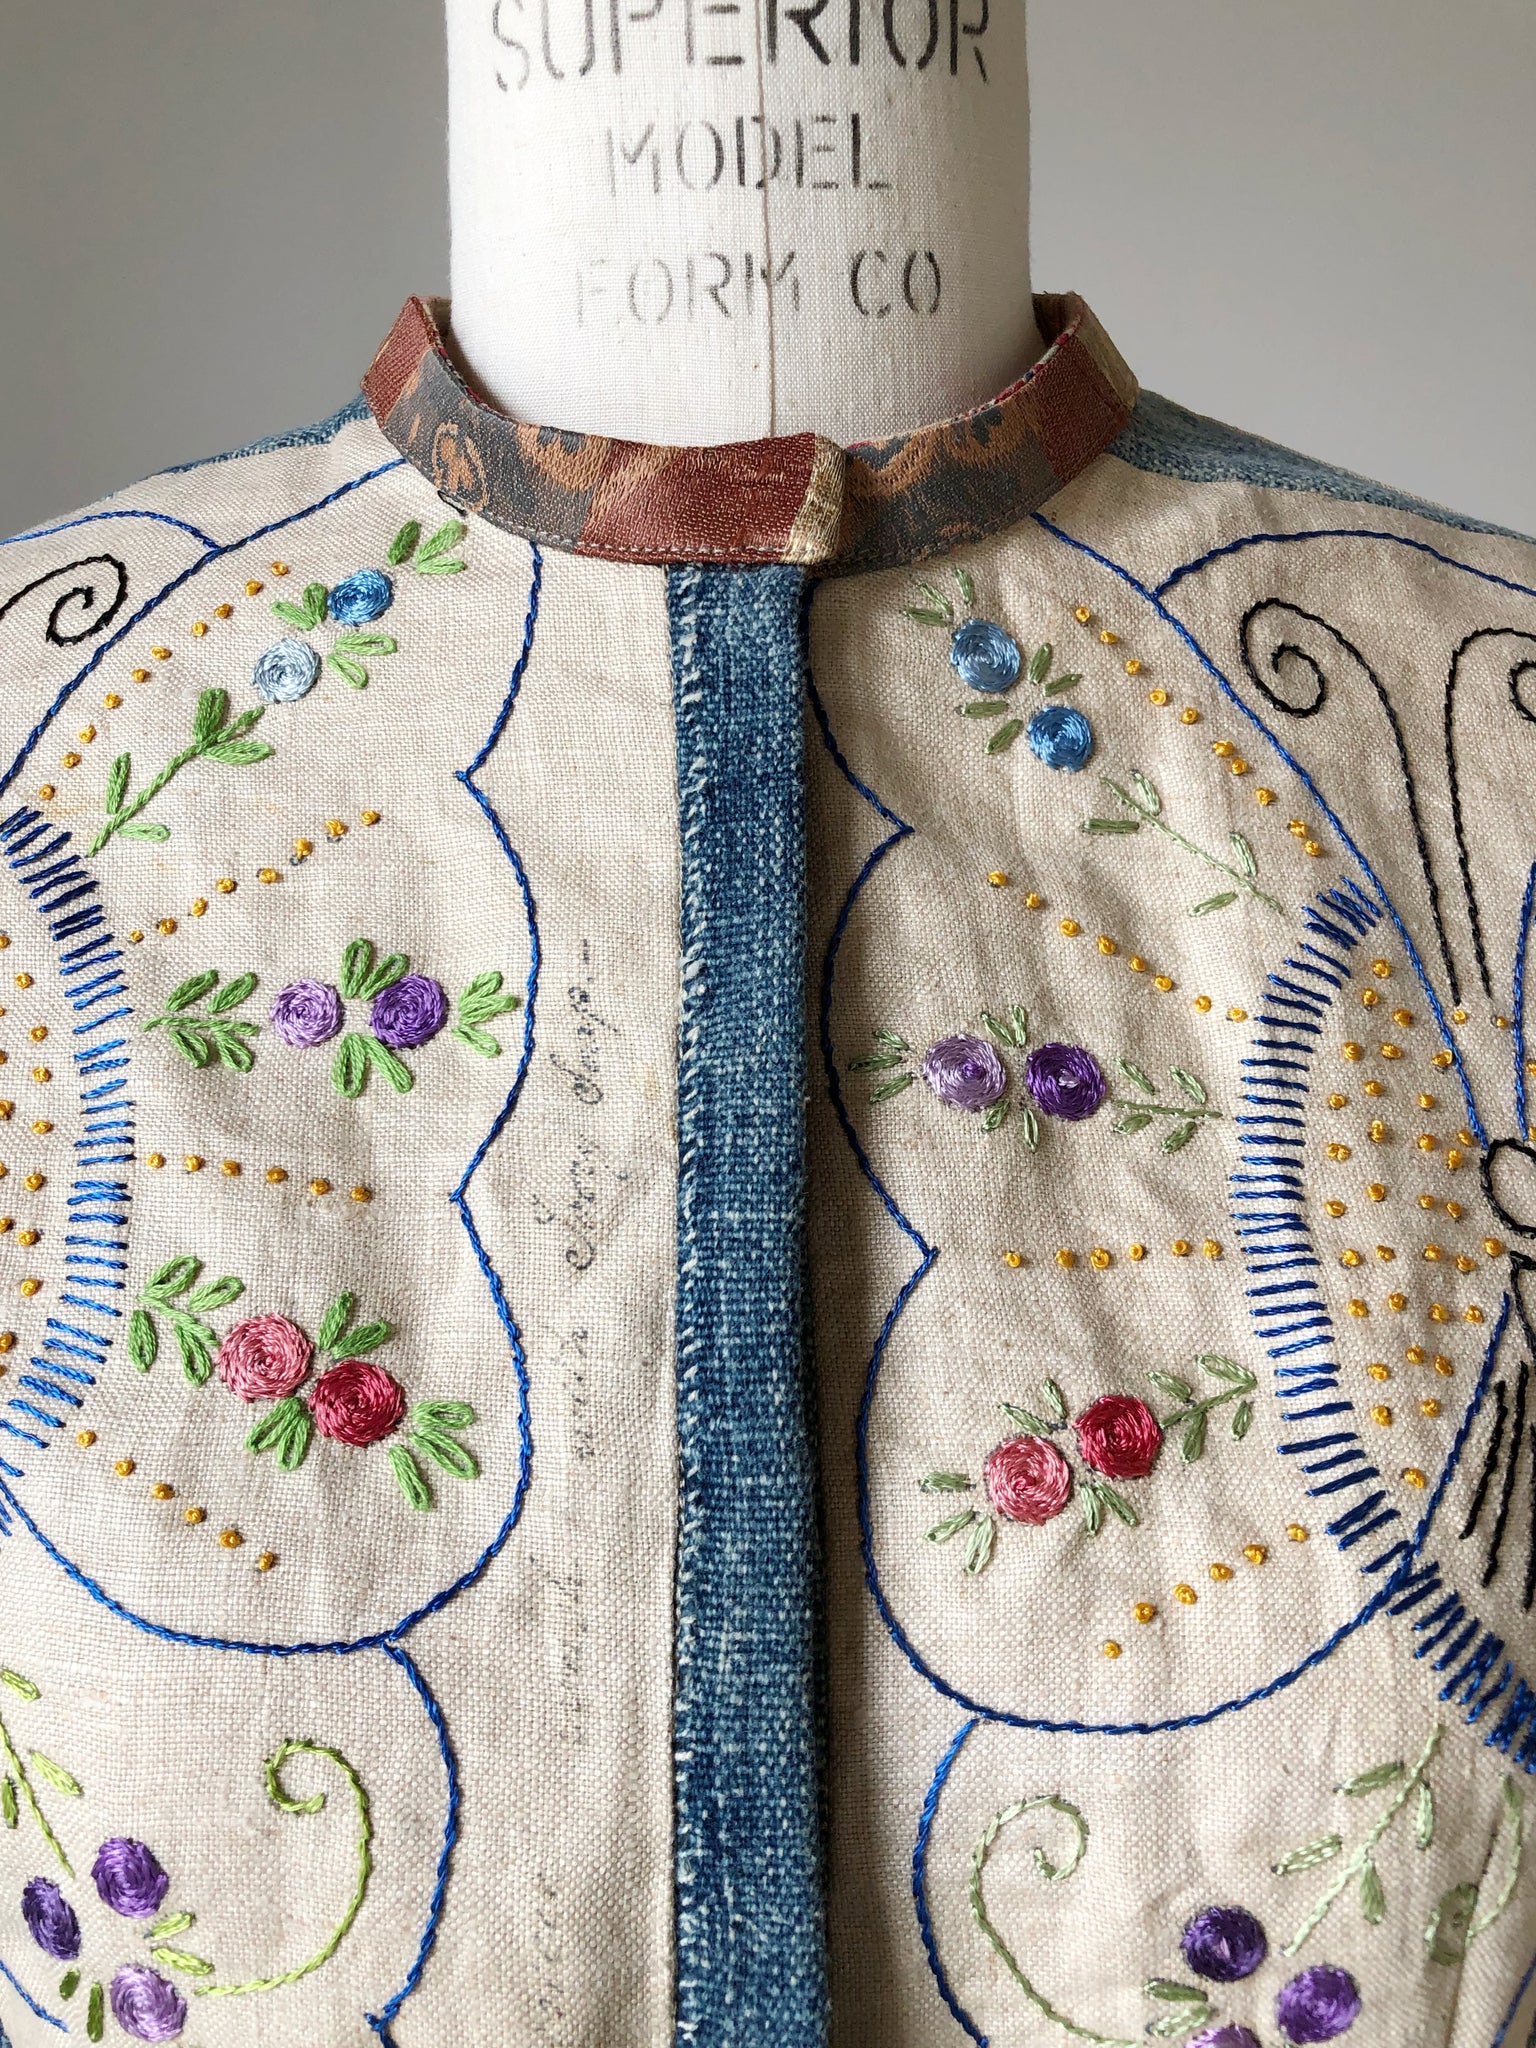 patched butterfly embroidery and African indigo cloth shirt jacket ...